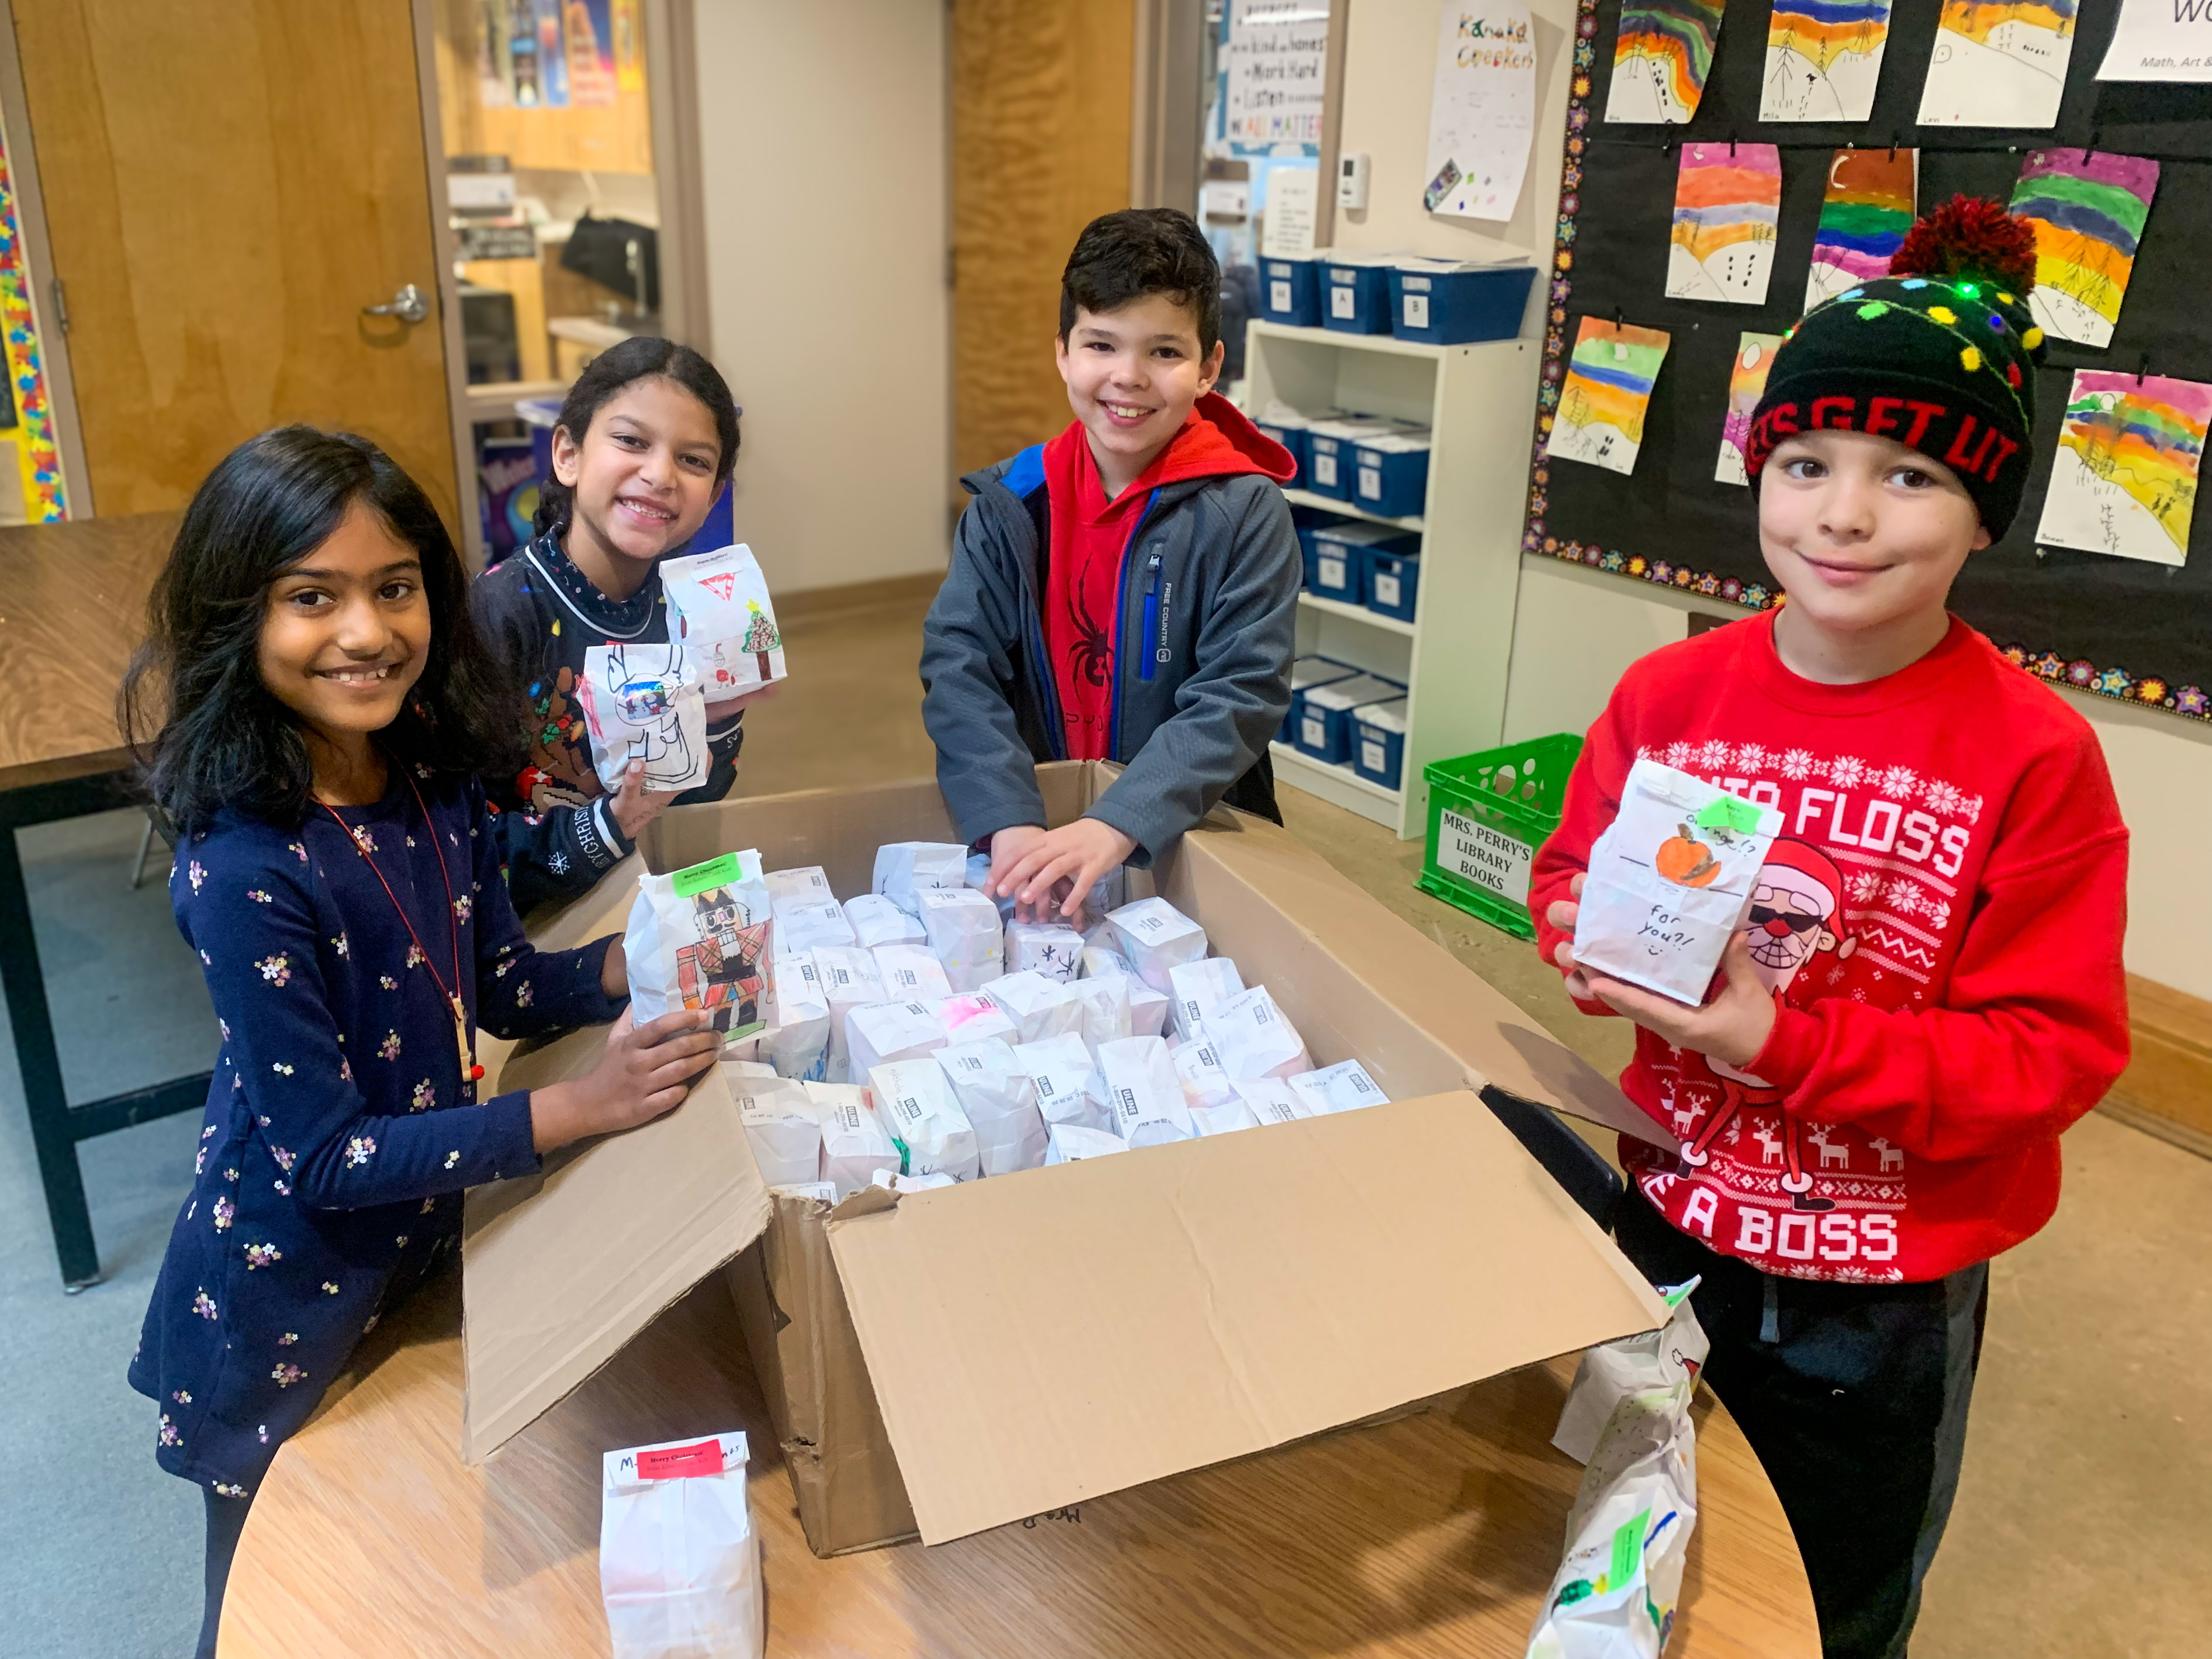 Kanaka Creek students place decorated holiday treat bags into a box.